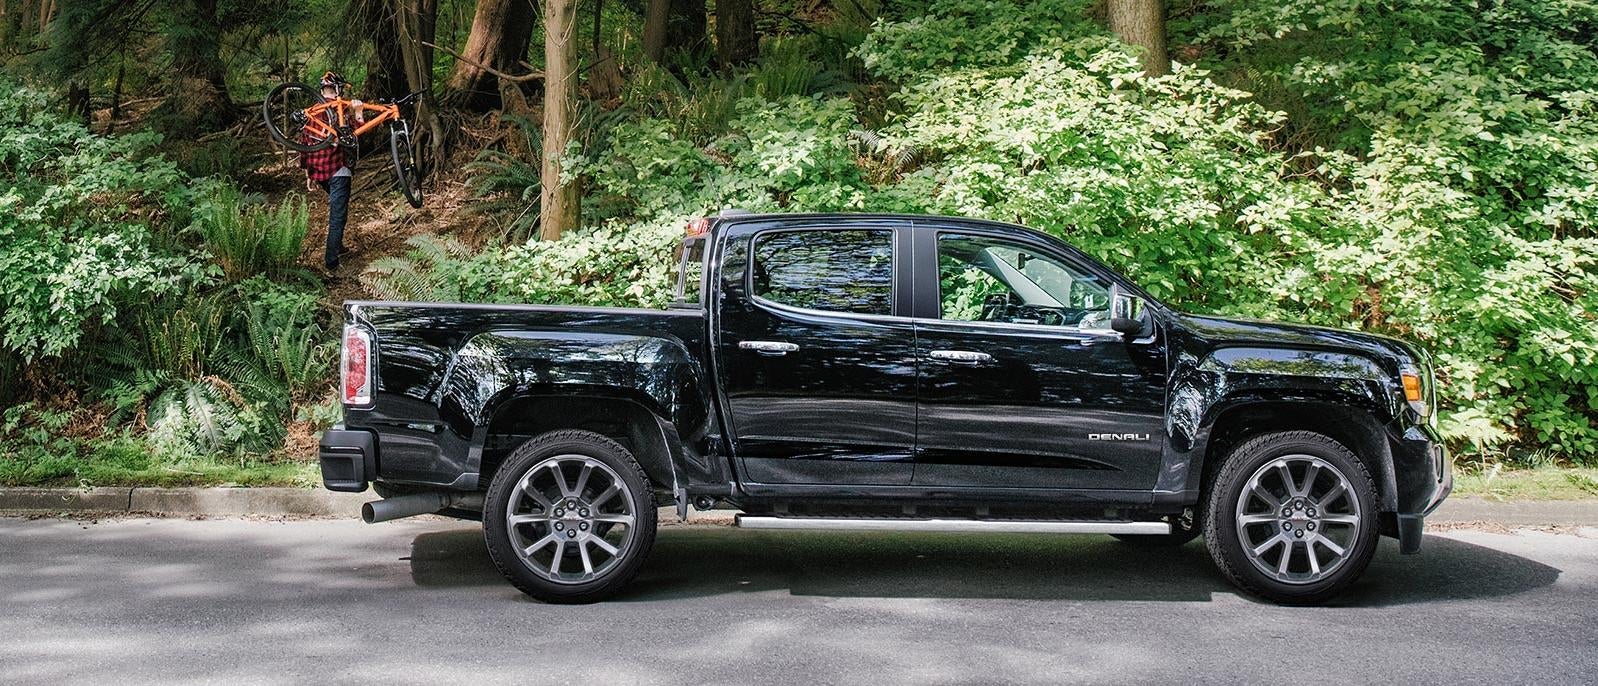 2019 GMC Canyon Fishers IN | Andy Mohr Buick GMC